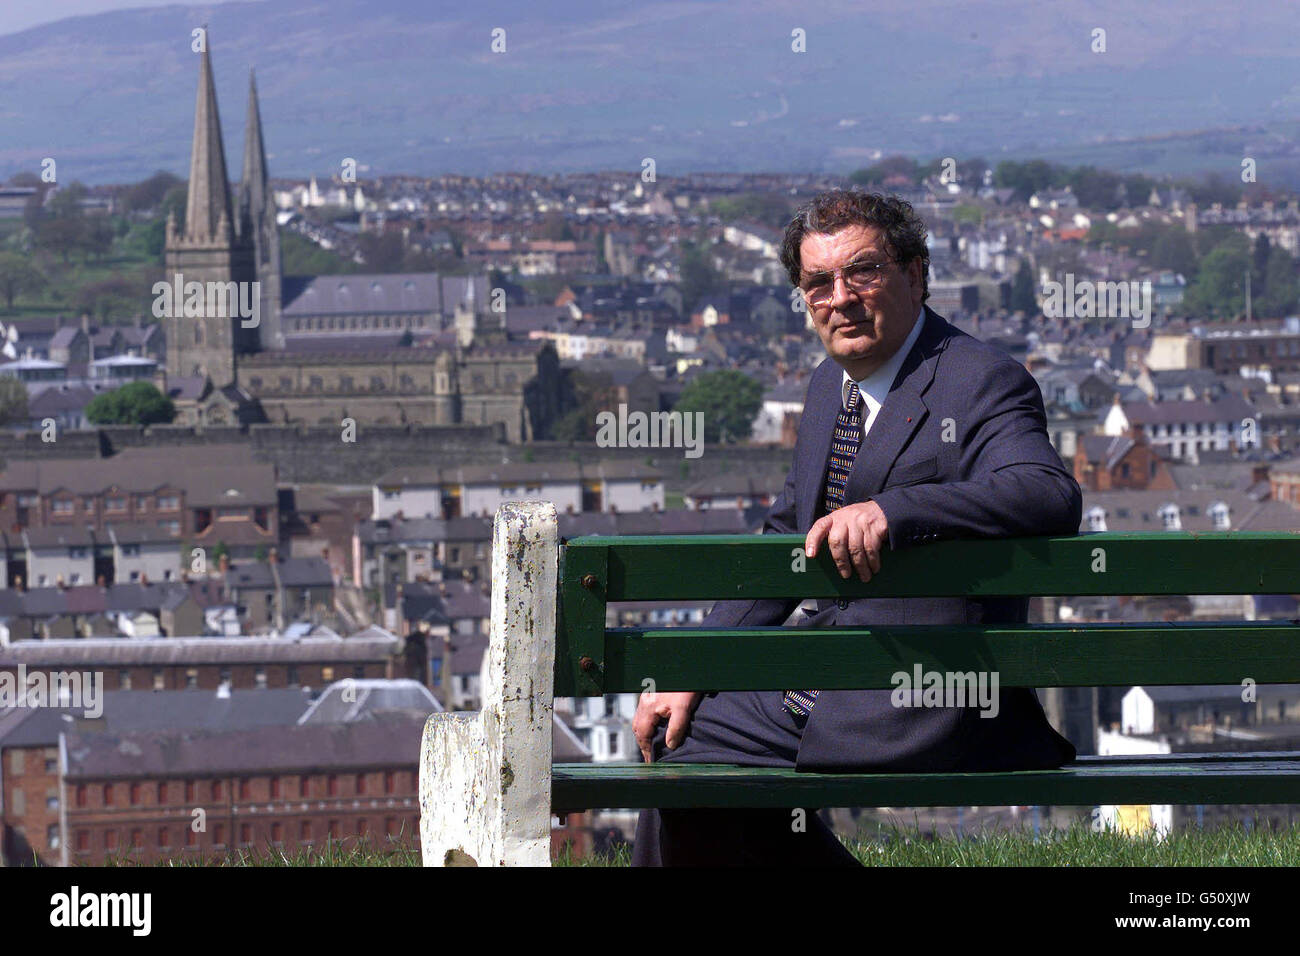 Nobel Laureate John Hume M.P. with Londonderry city in the background, before Londonderry City Council honour the SDLP leader Hume by giving him the freedom of the city. Stock Photo